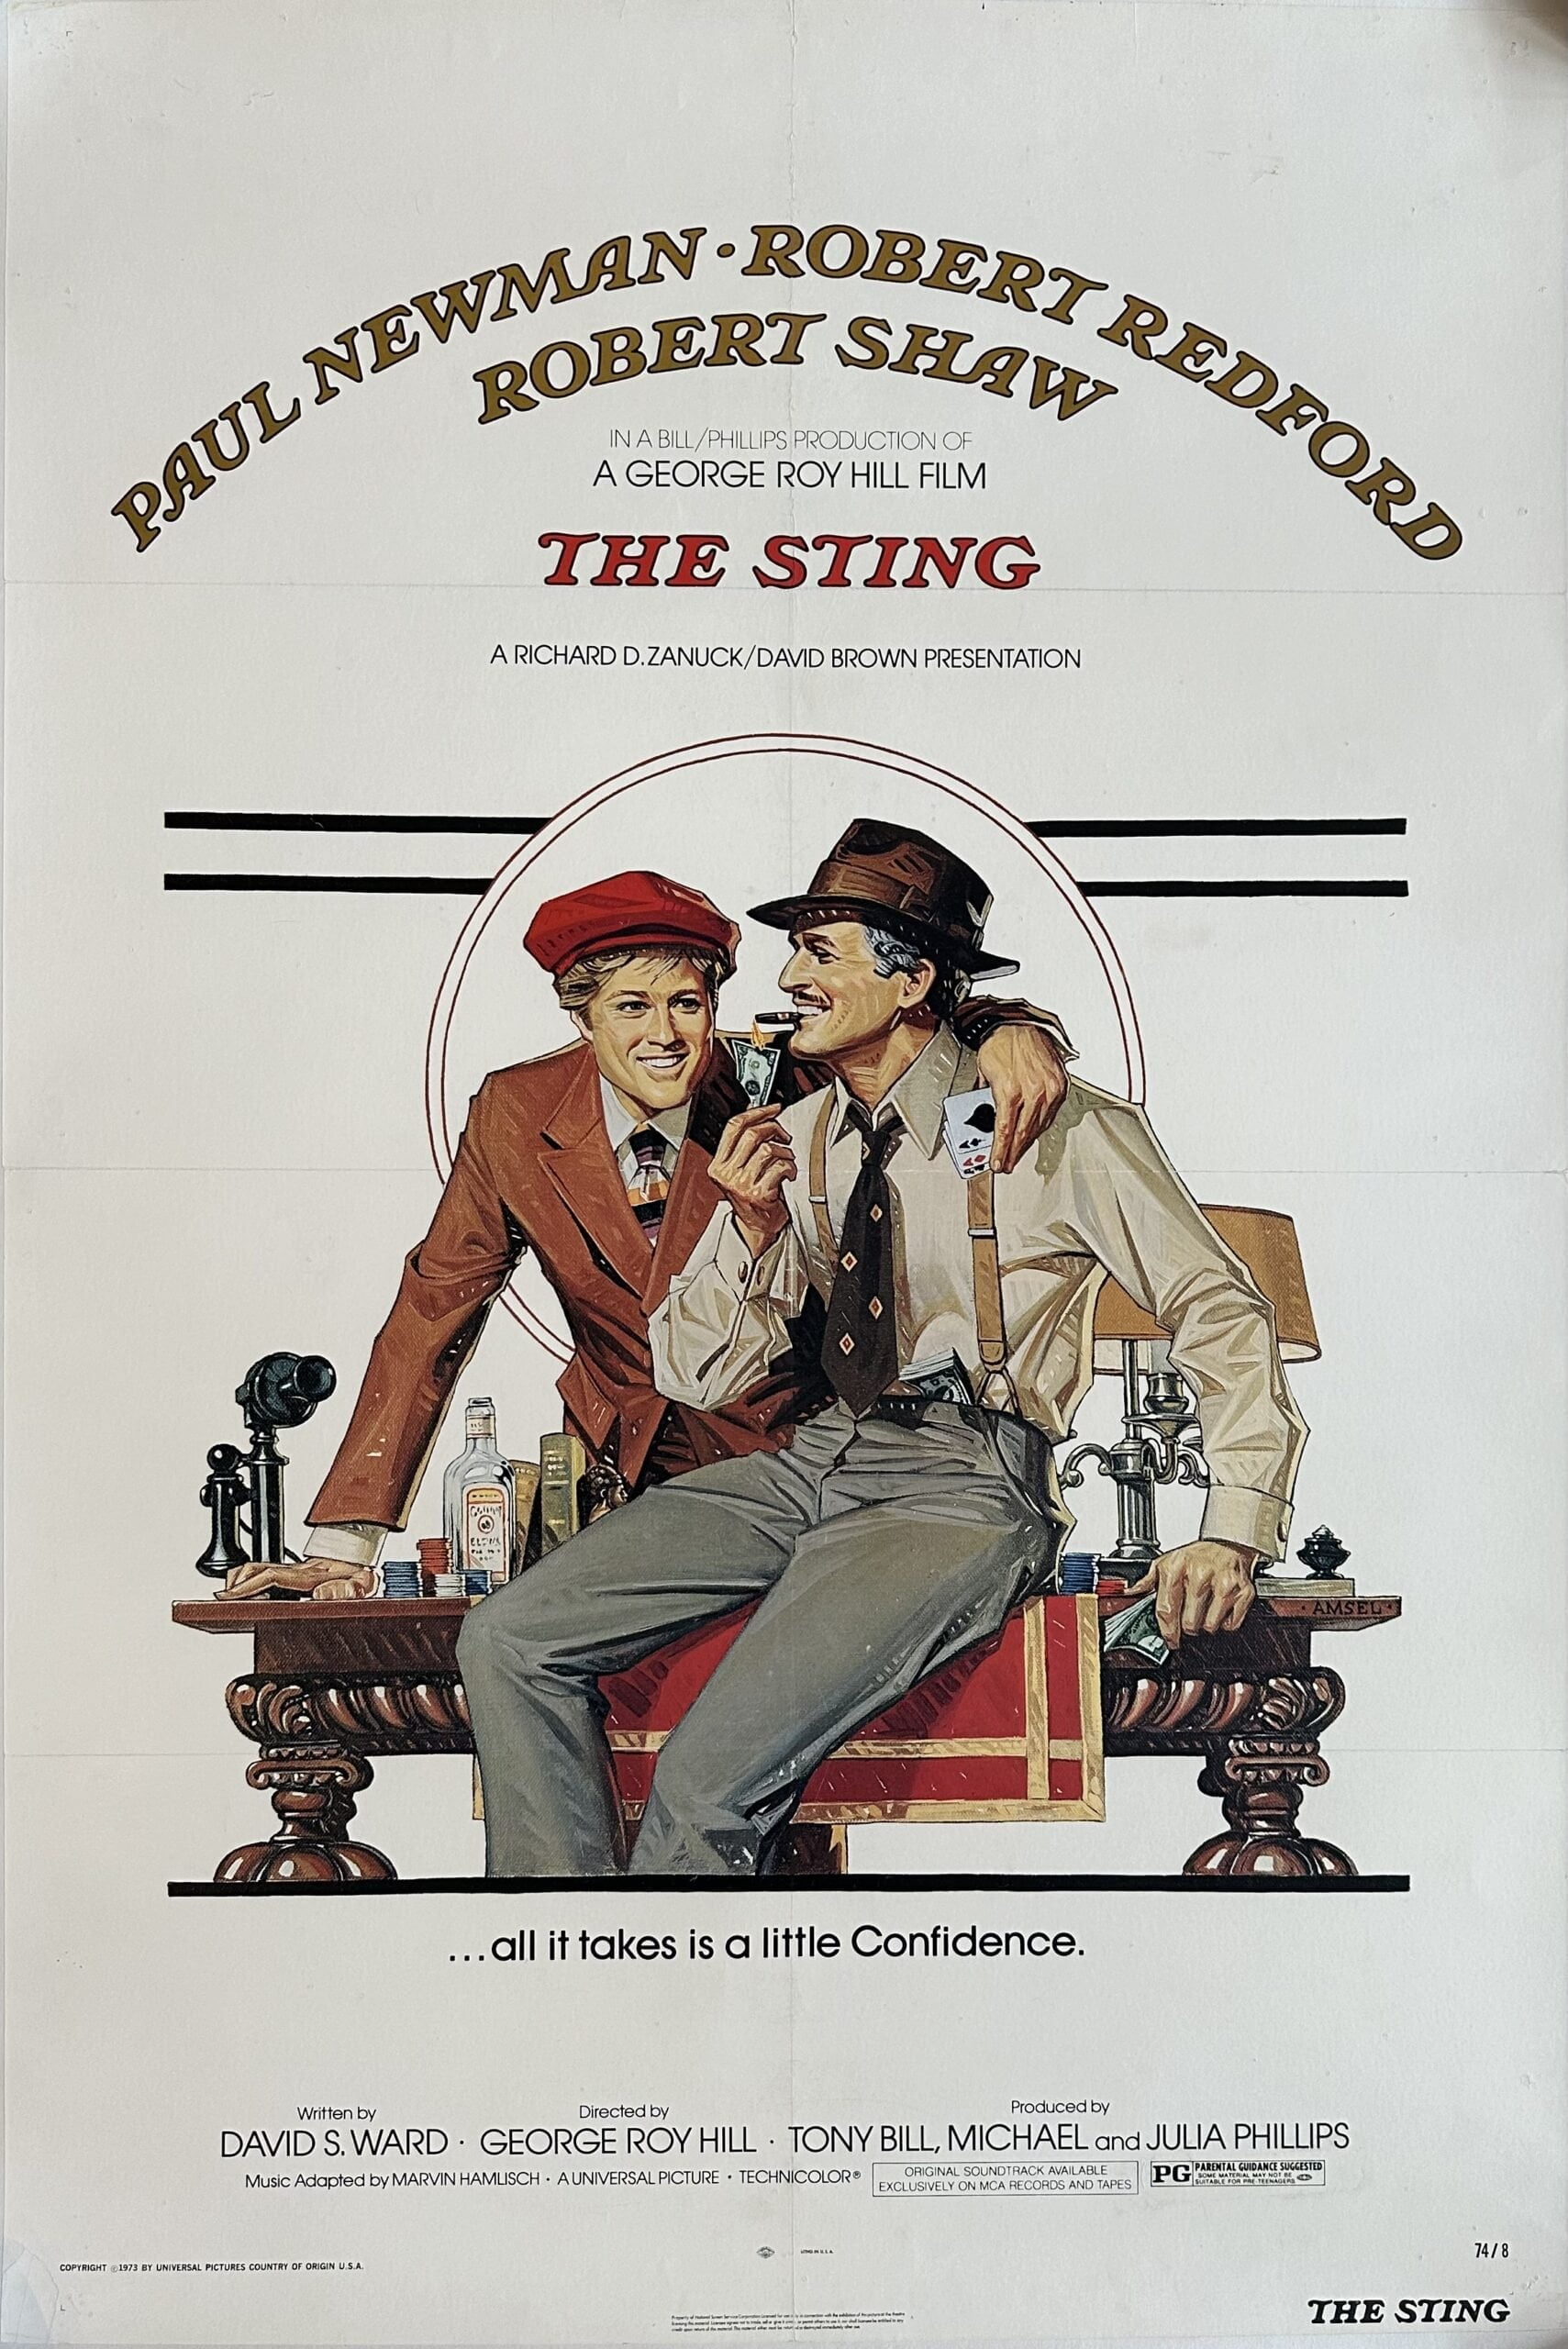 Original vintage cinema movie poster for The Sting, starring Paul Newman and Robert Redford